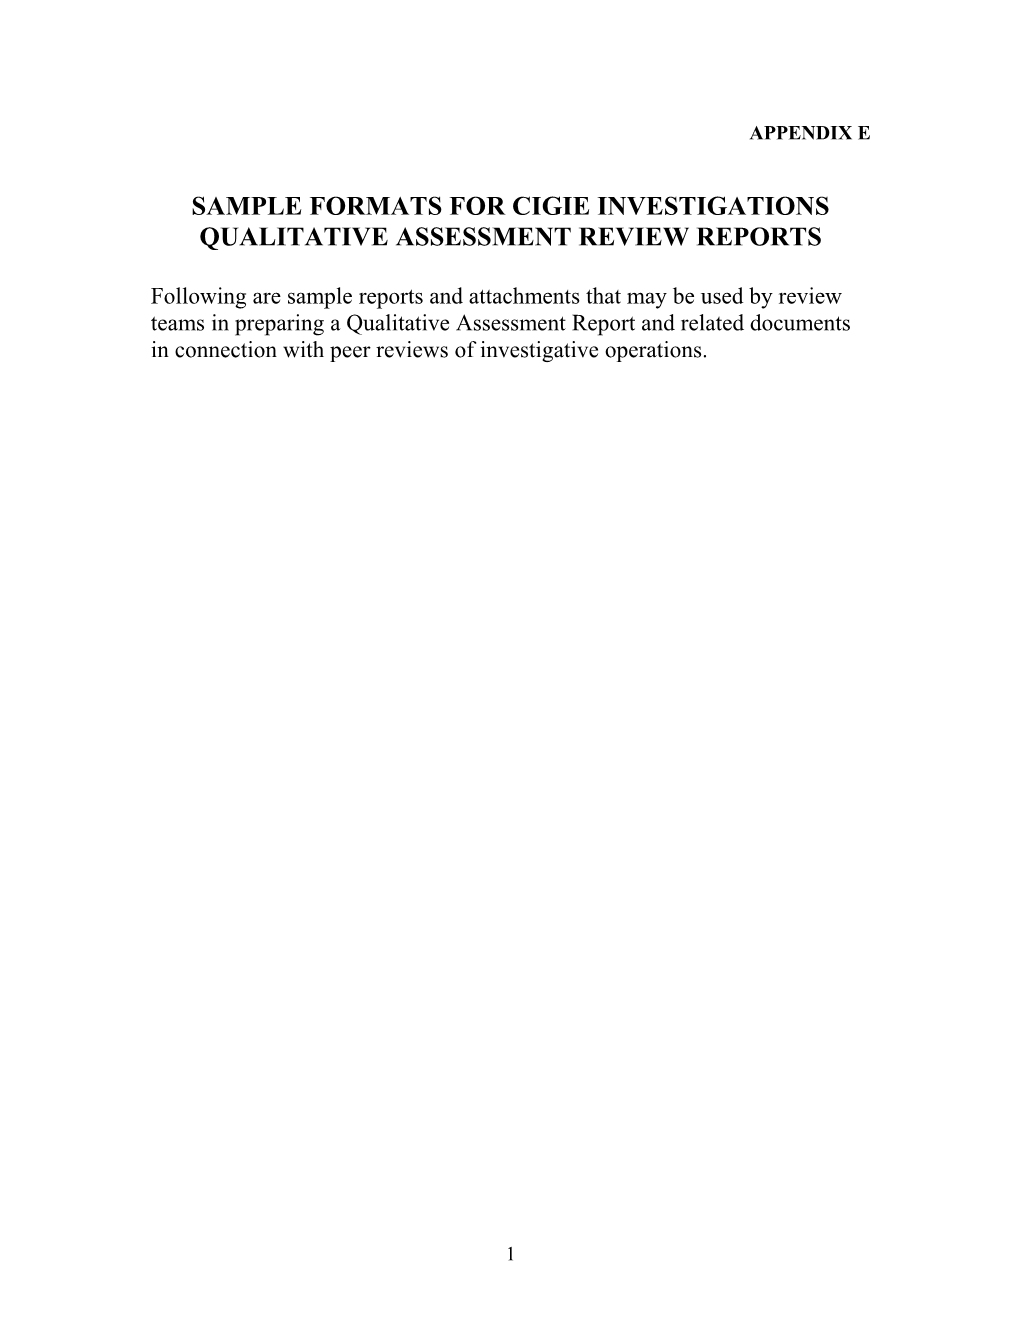 Sample Formats for Cigie Investigations Qualitative Assessment Review Reports